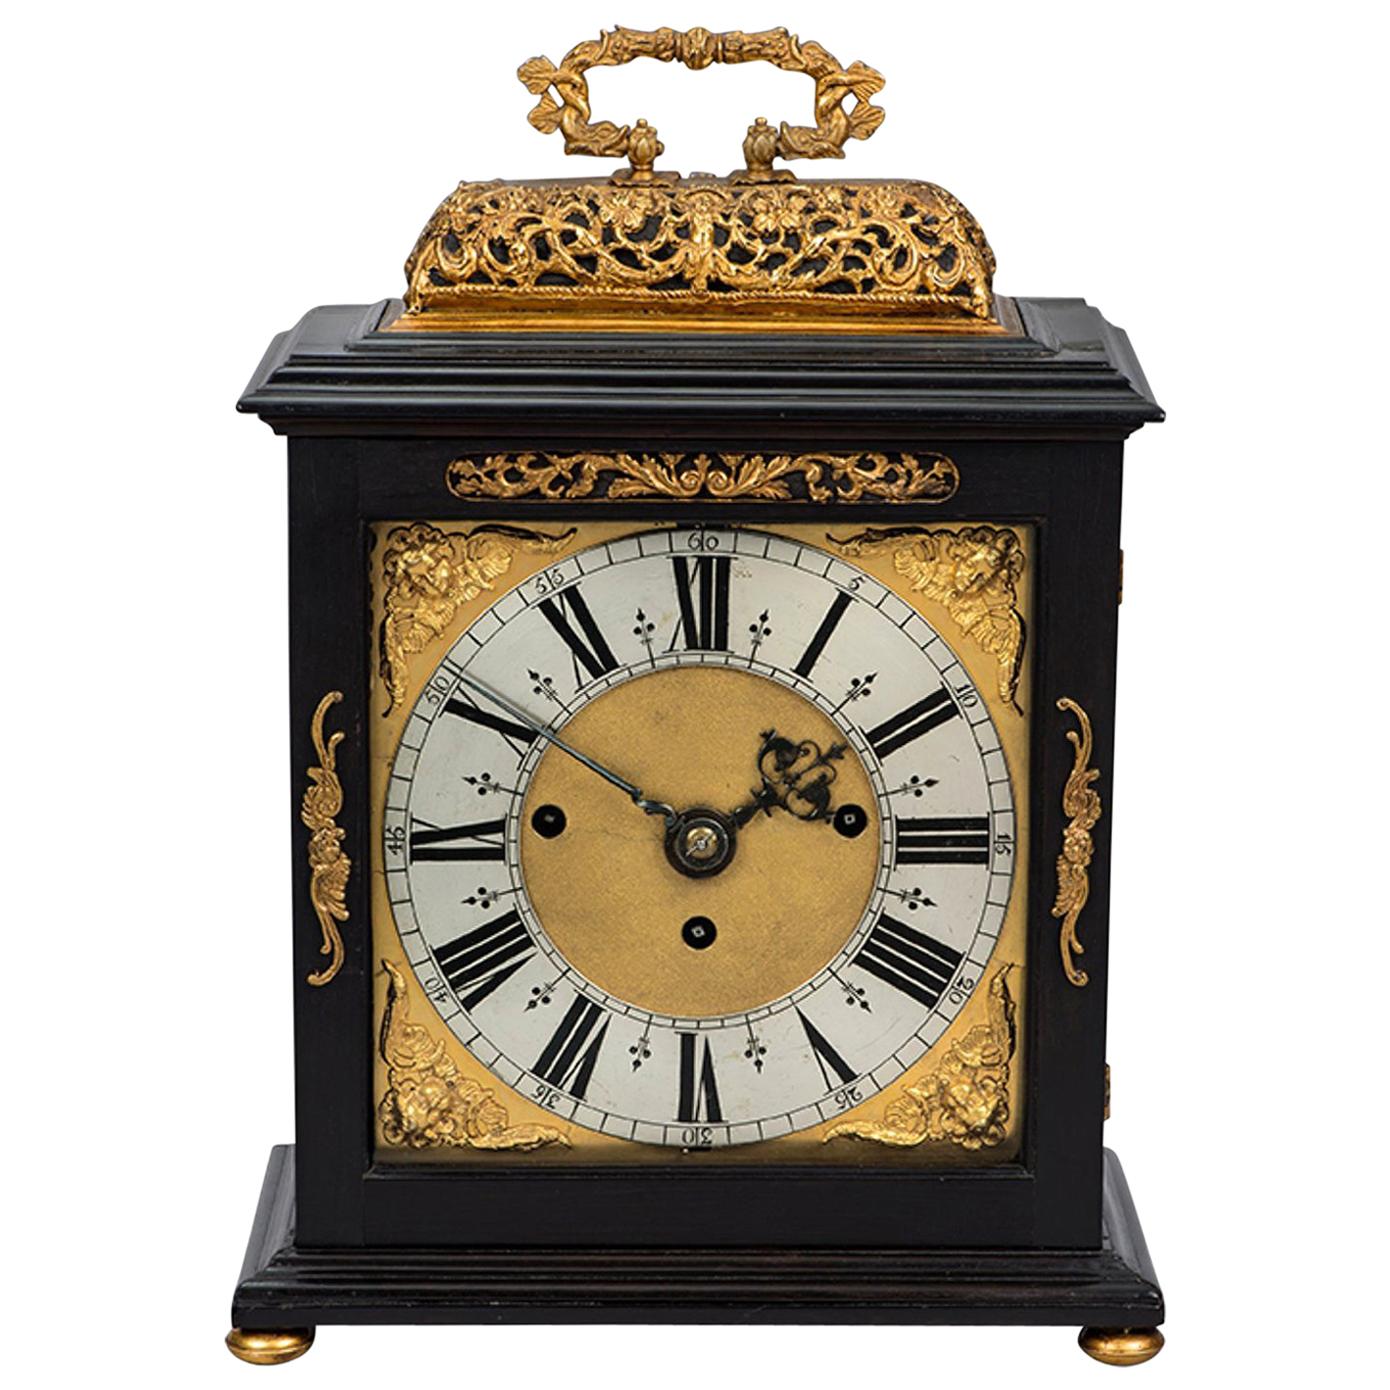 17th Century Antique Ebony and Gilt Table Clock by Edward Burgis of London